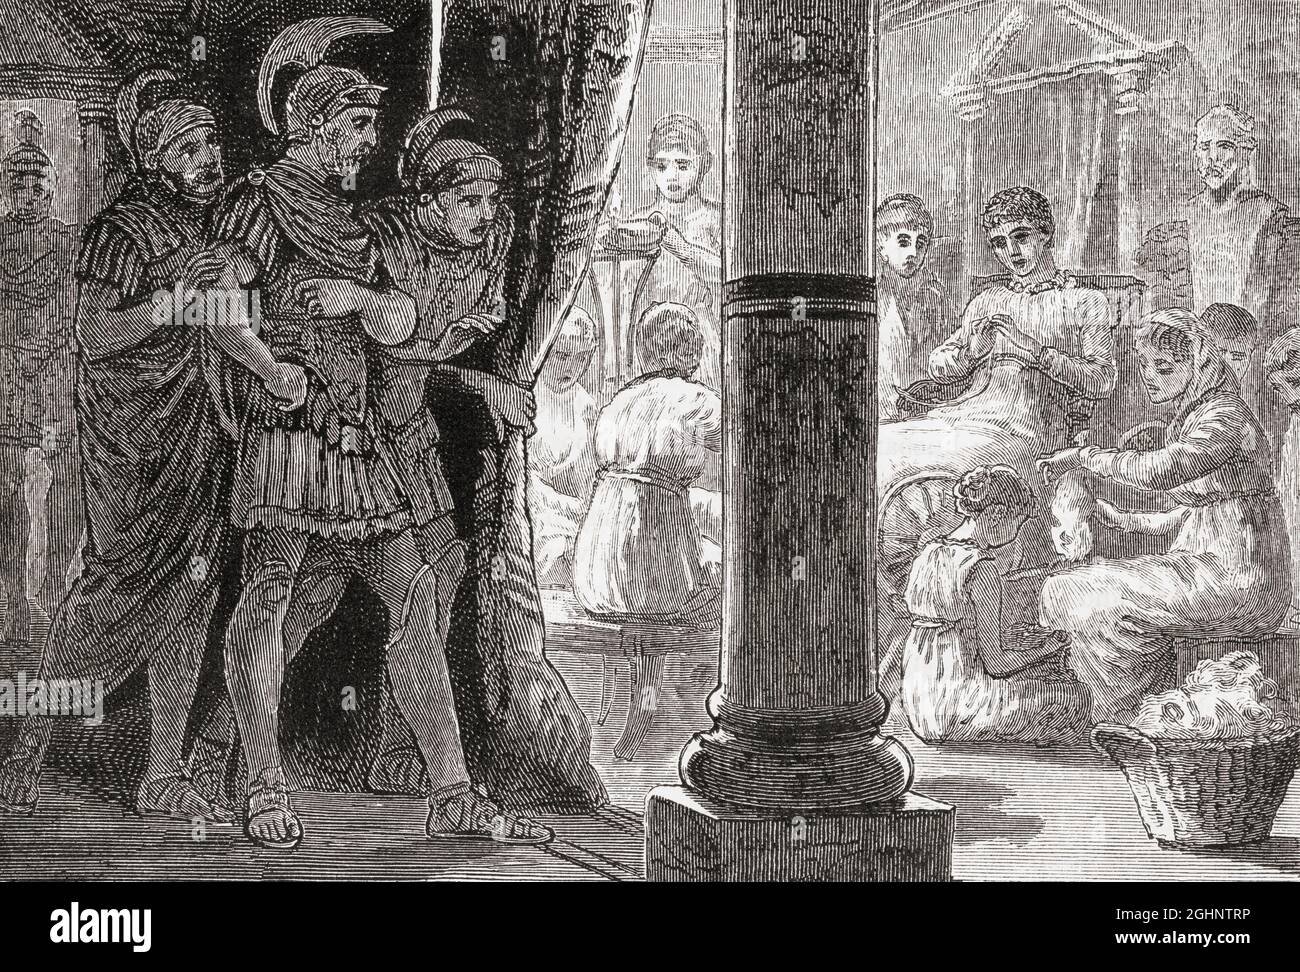 Lucretia with her maidens.  Lucretia, d.510 BC,  Roman heroine who committed suicide after being raped by Sextus Tarquinius (Tarquin), son of the last king of Rome, Lucius Tarquinius Superbus.  From Cassell's Illustrated Universal History, published 1883. Stock Photo